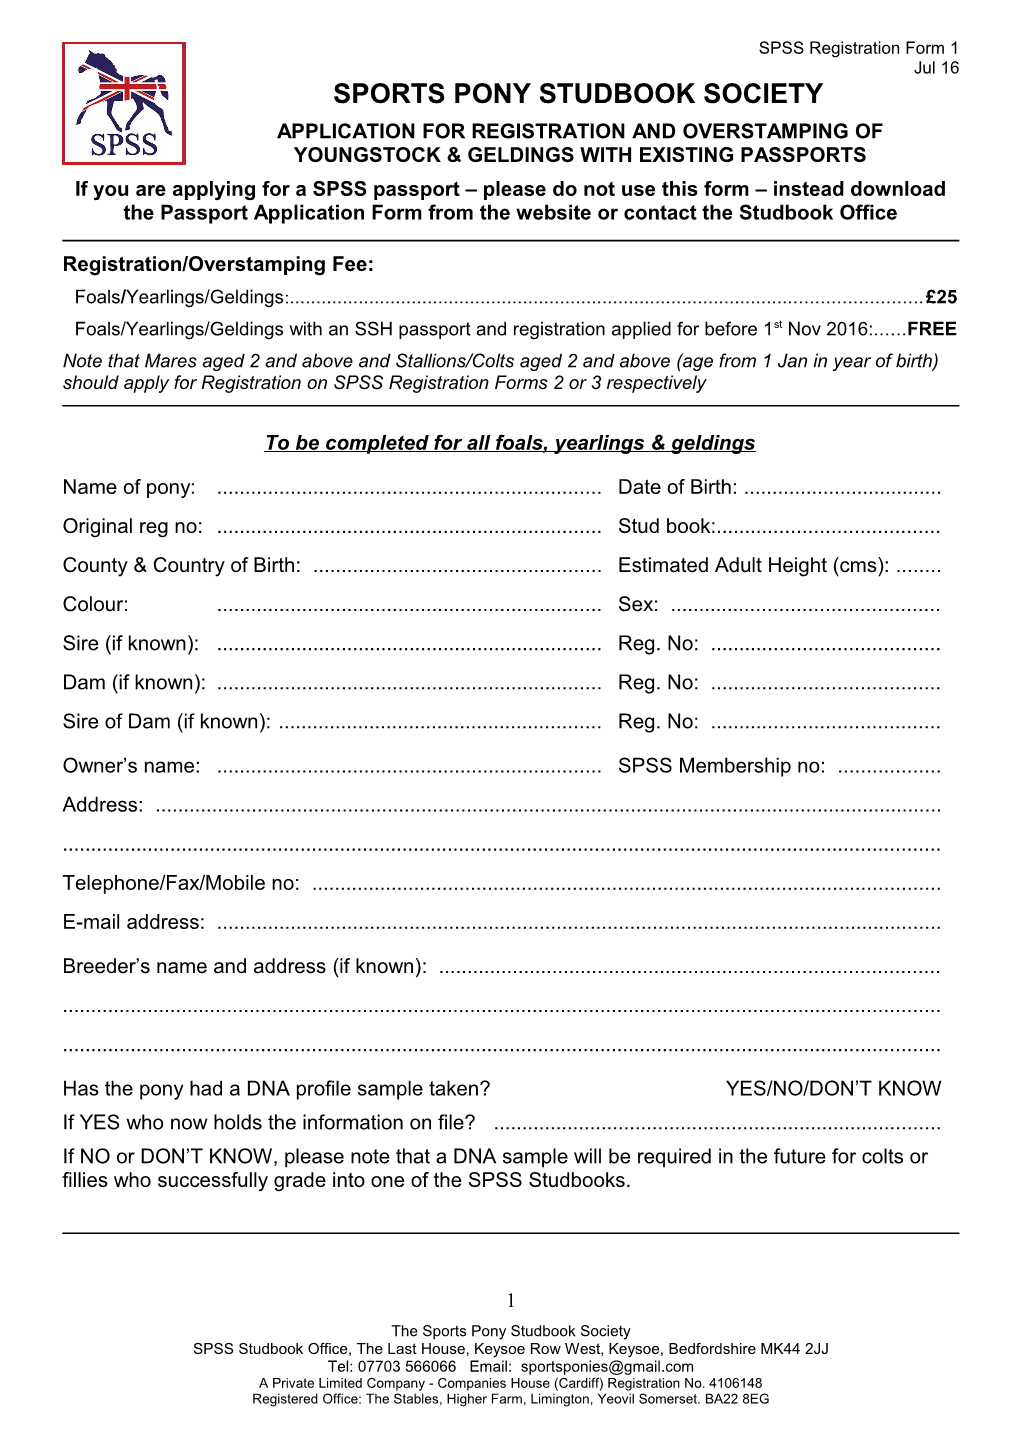 Regitration Form 3 - Youngstock